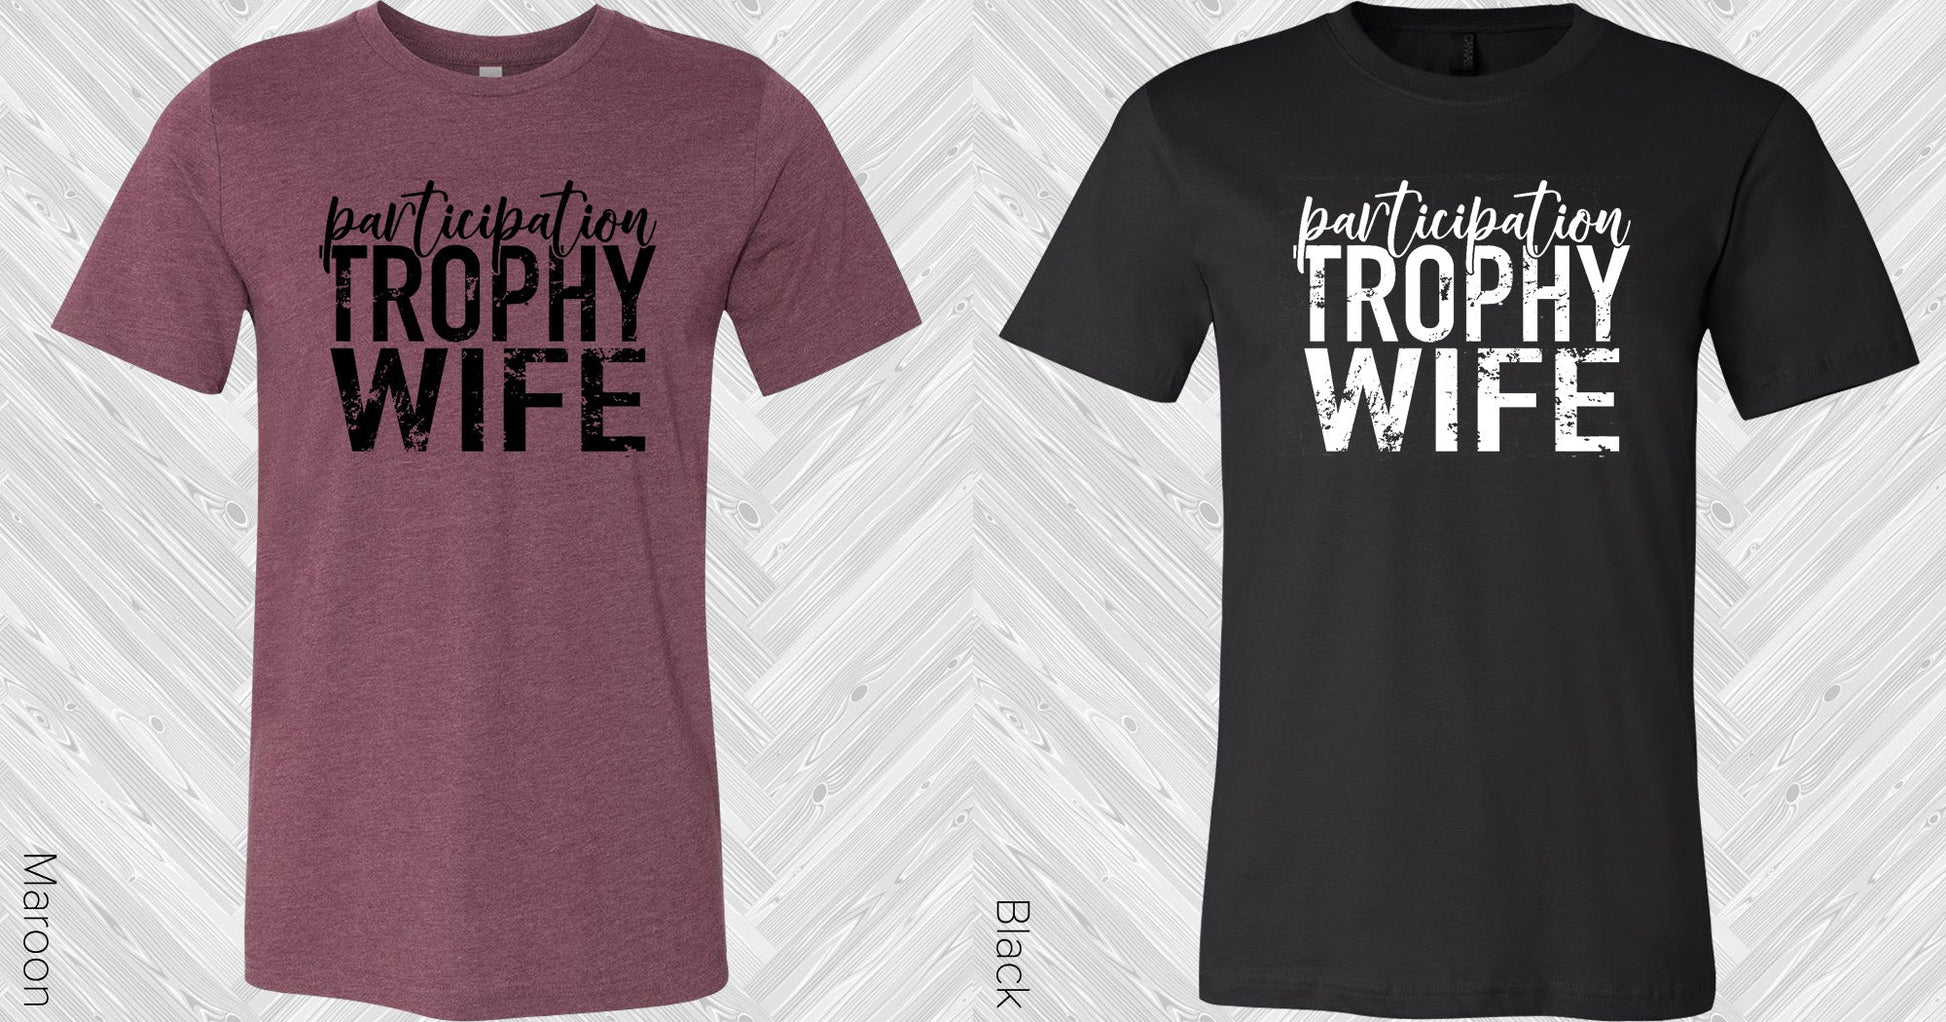 Participation Trophy Wife Graphic Tee Graphic Tee